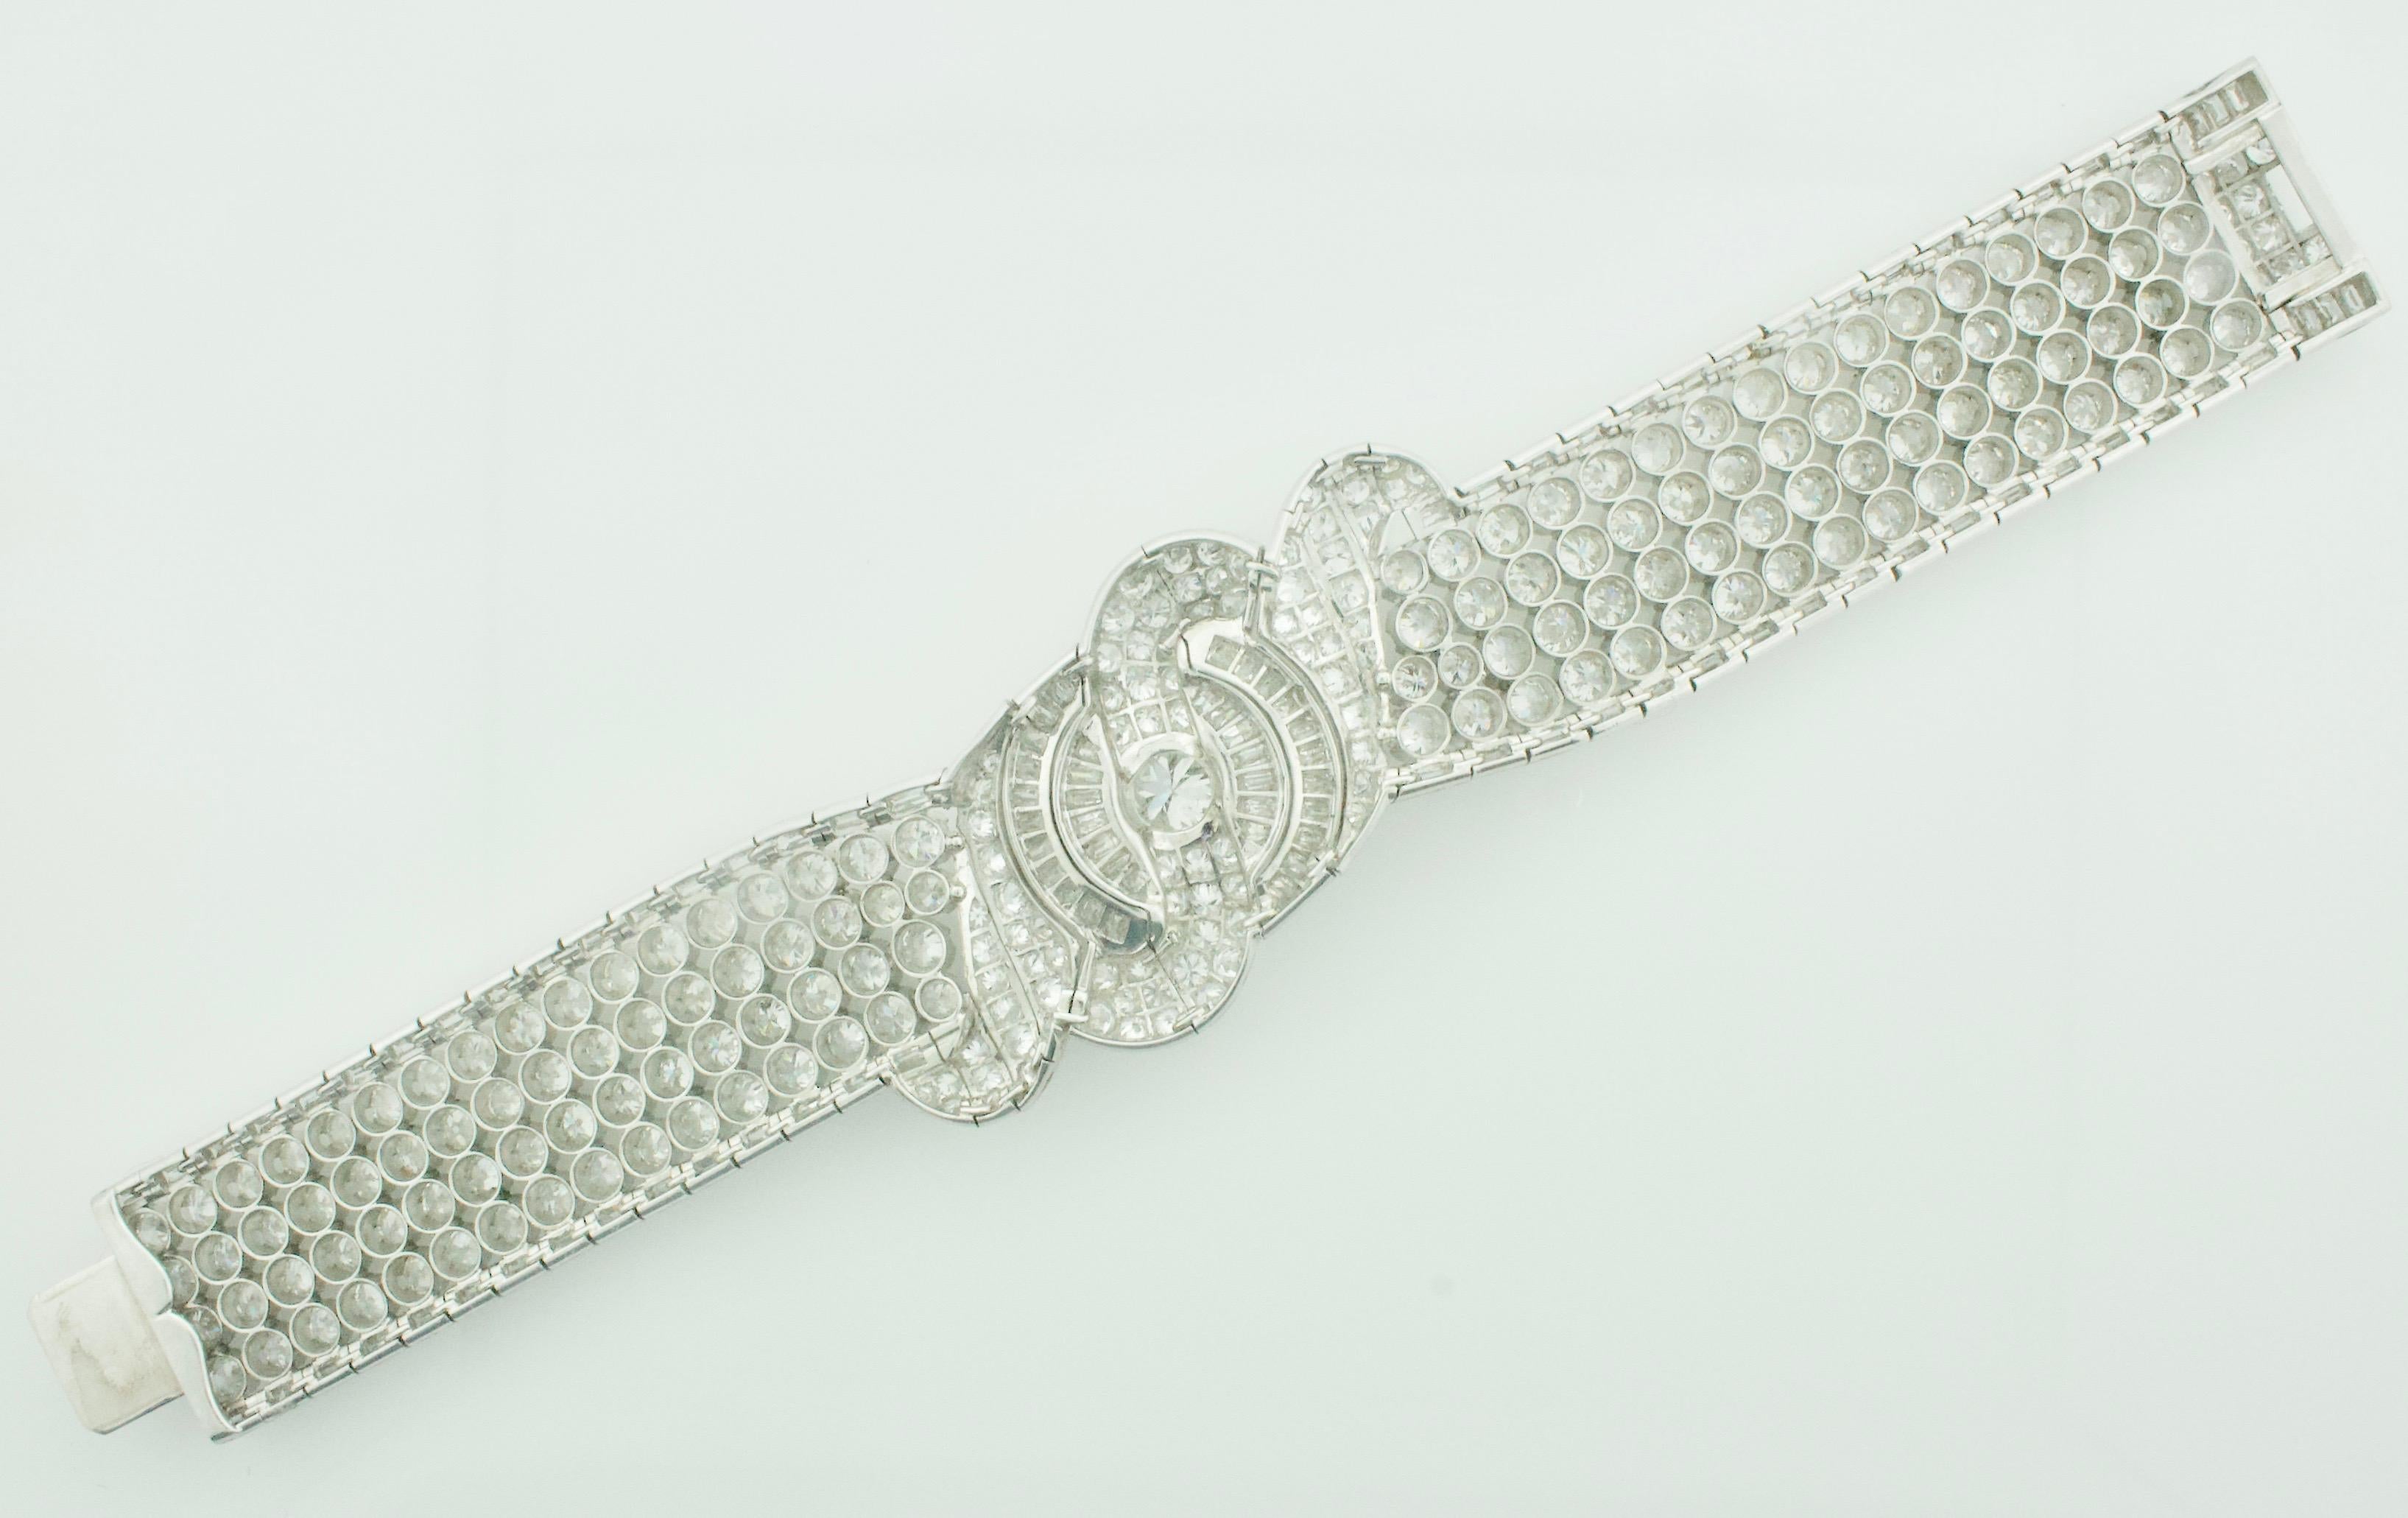 Important Blockbuster Diamond Bracelet in Platinum 54.00 Carats Circa 1940's
1 Old European Cut Diamond Weighing 1.30 Carats Approximately [GHI - SI2] [bright with no imperfections visible to the naked eye]
126  Old European Cut Diamonds Weighing